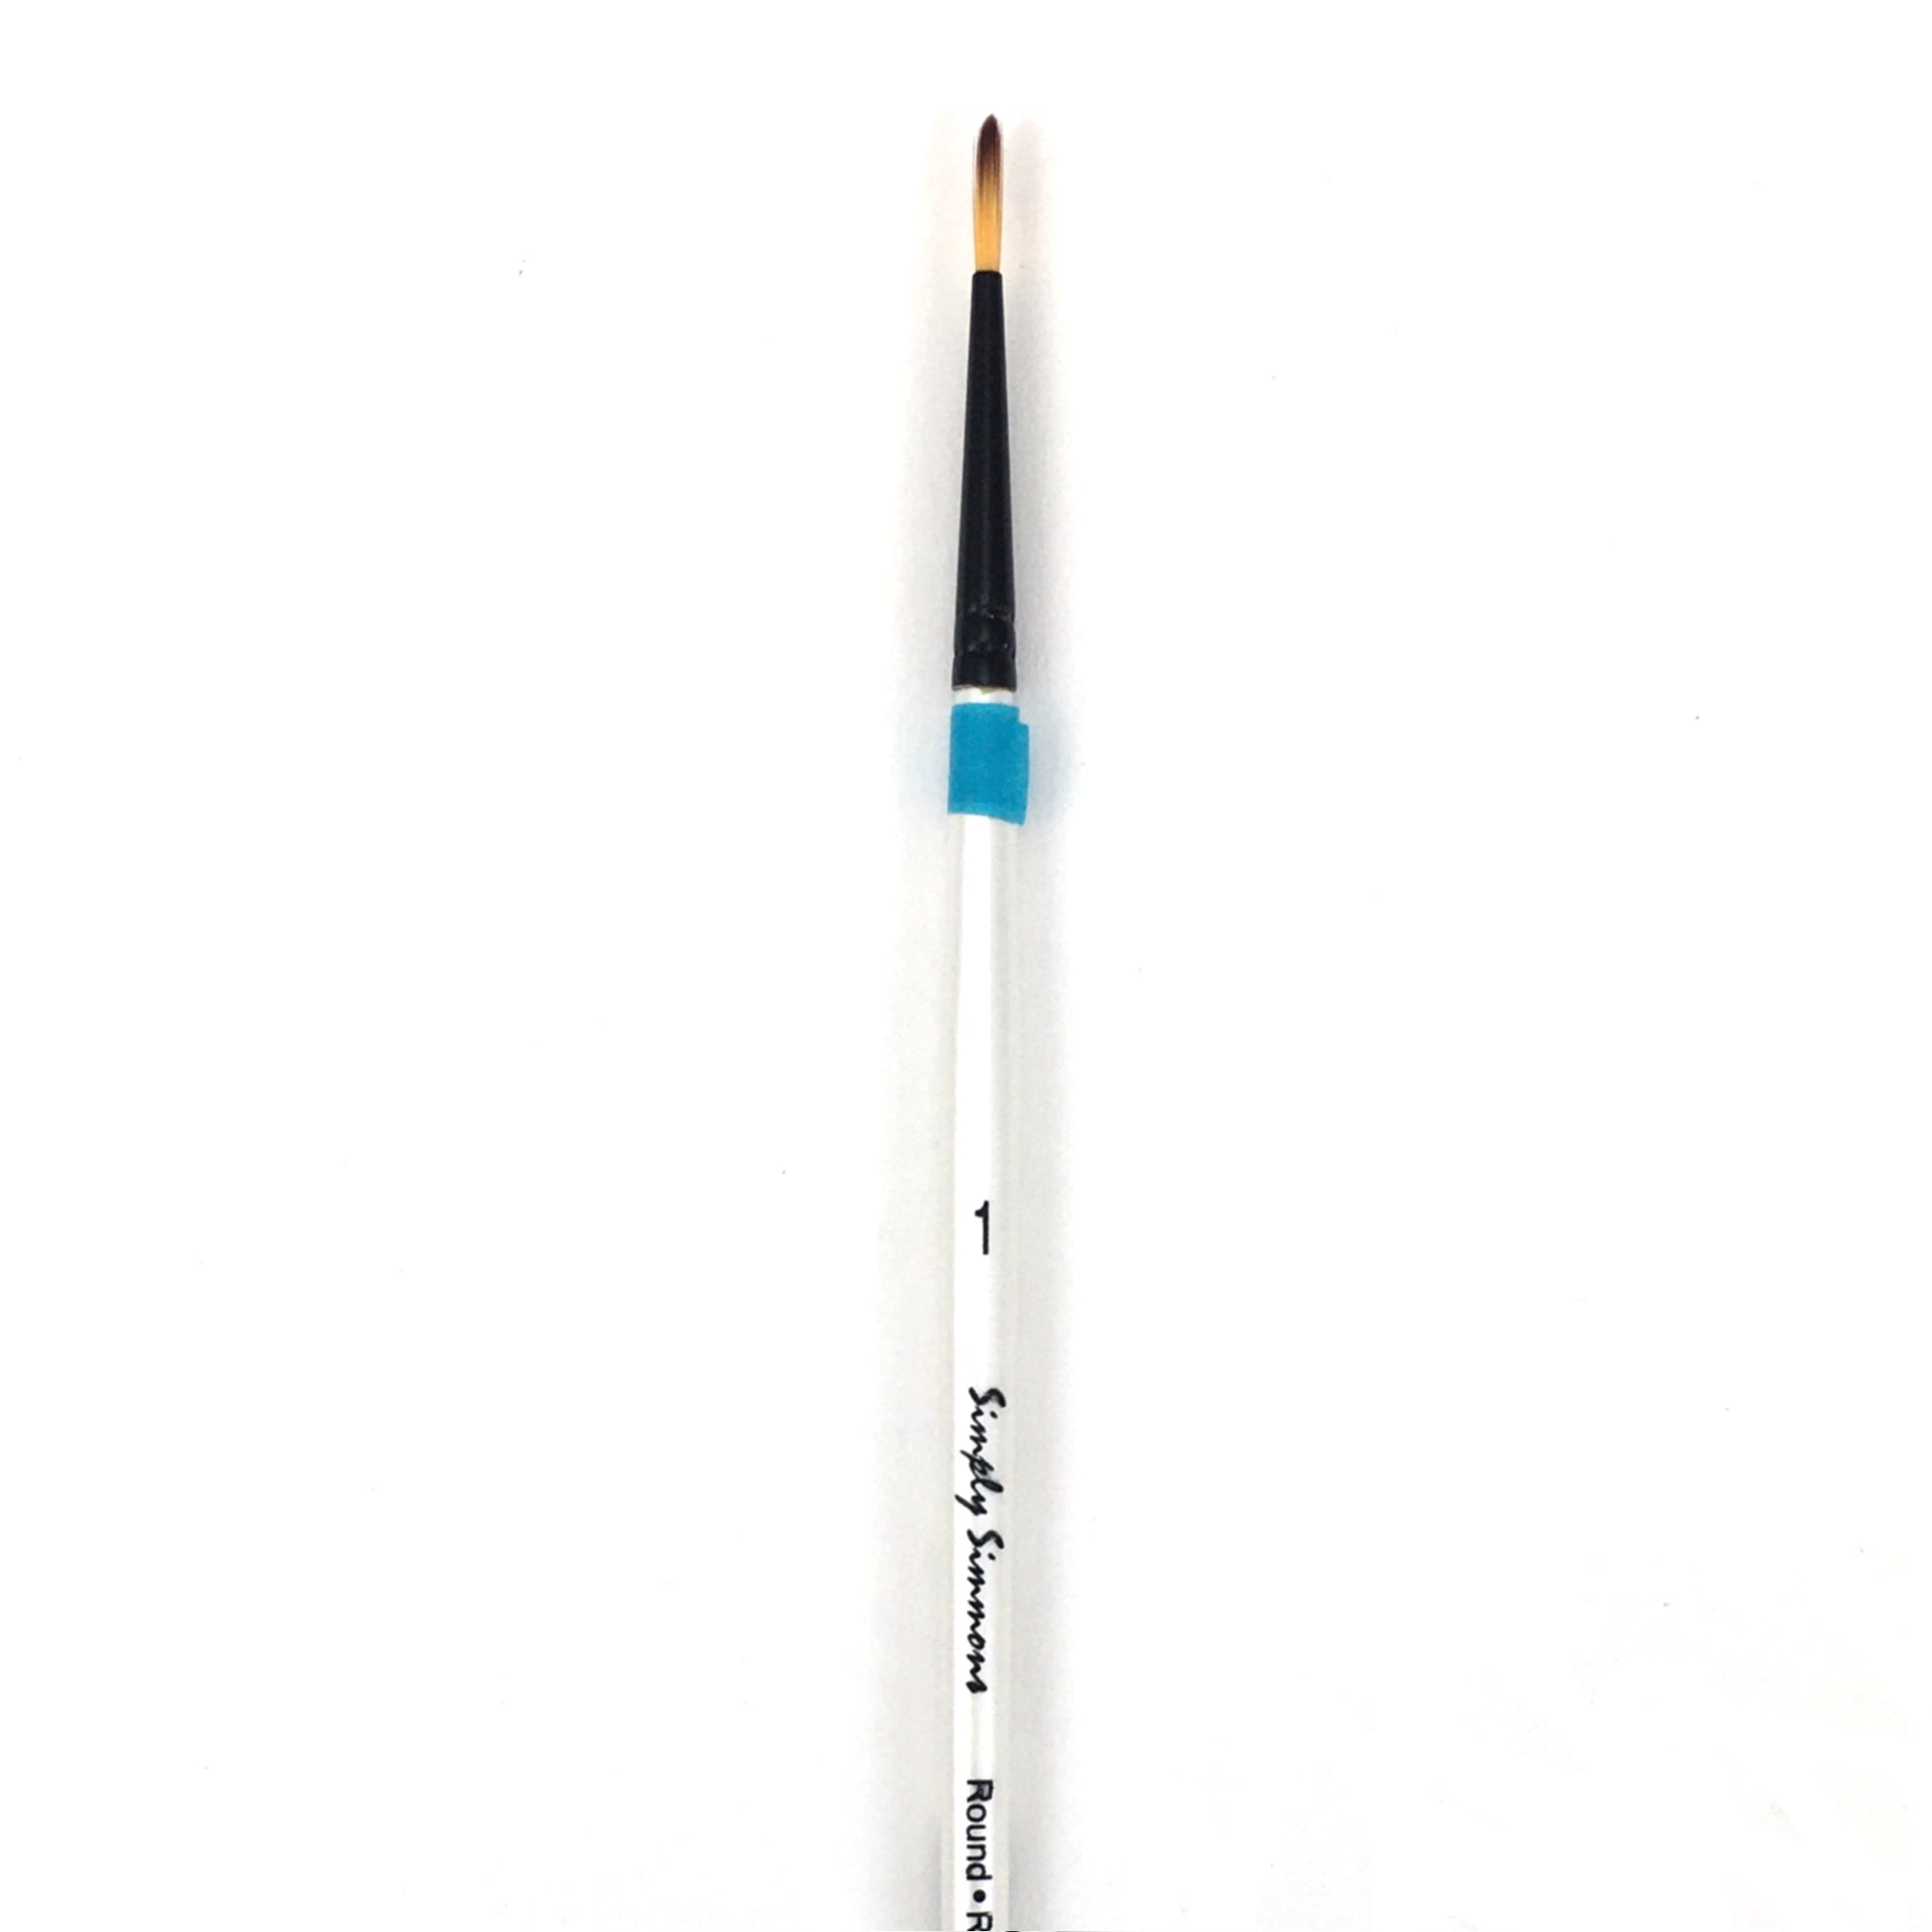 Simply Simmons Watercolor Brush - Short Handle - Round / - #1 / - synthetic by Robert Simmons - K. A. Artist Shop